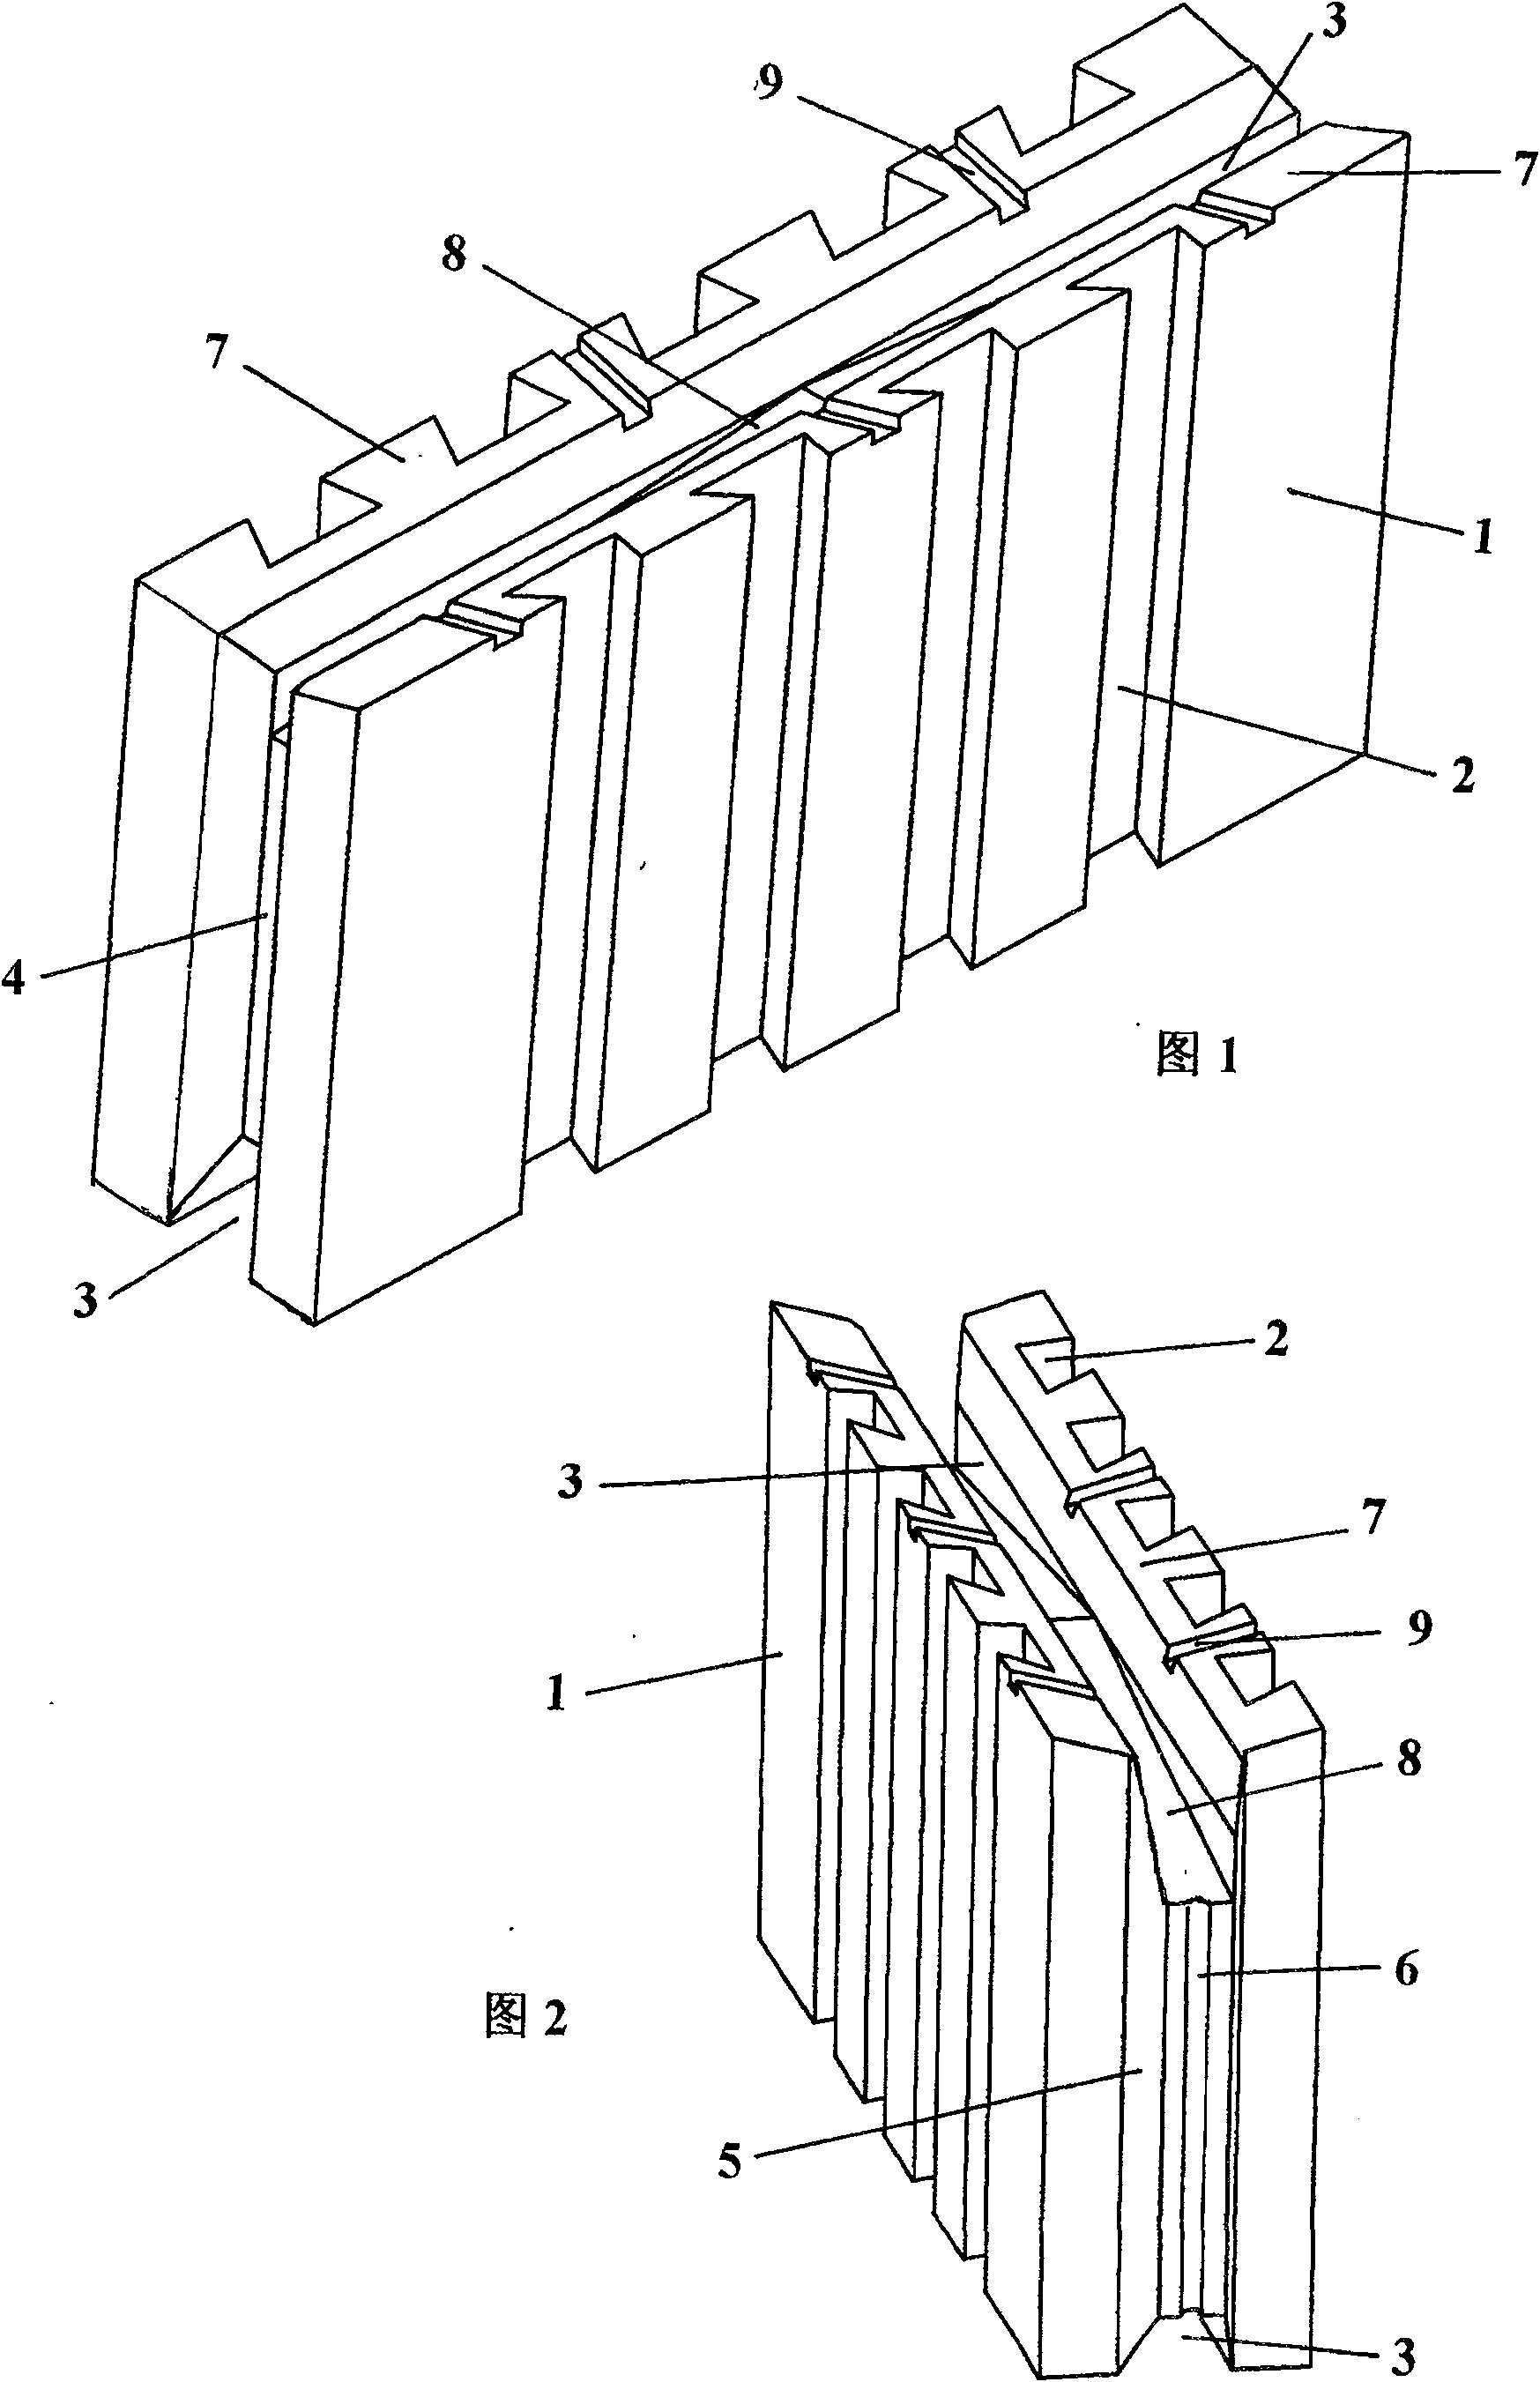 Insulating board for composite insulating block and method for making same